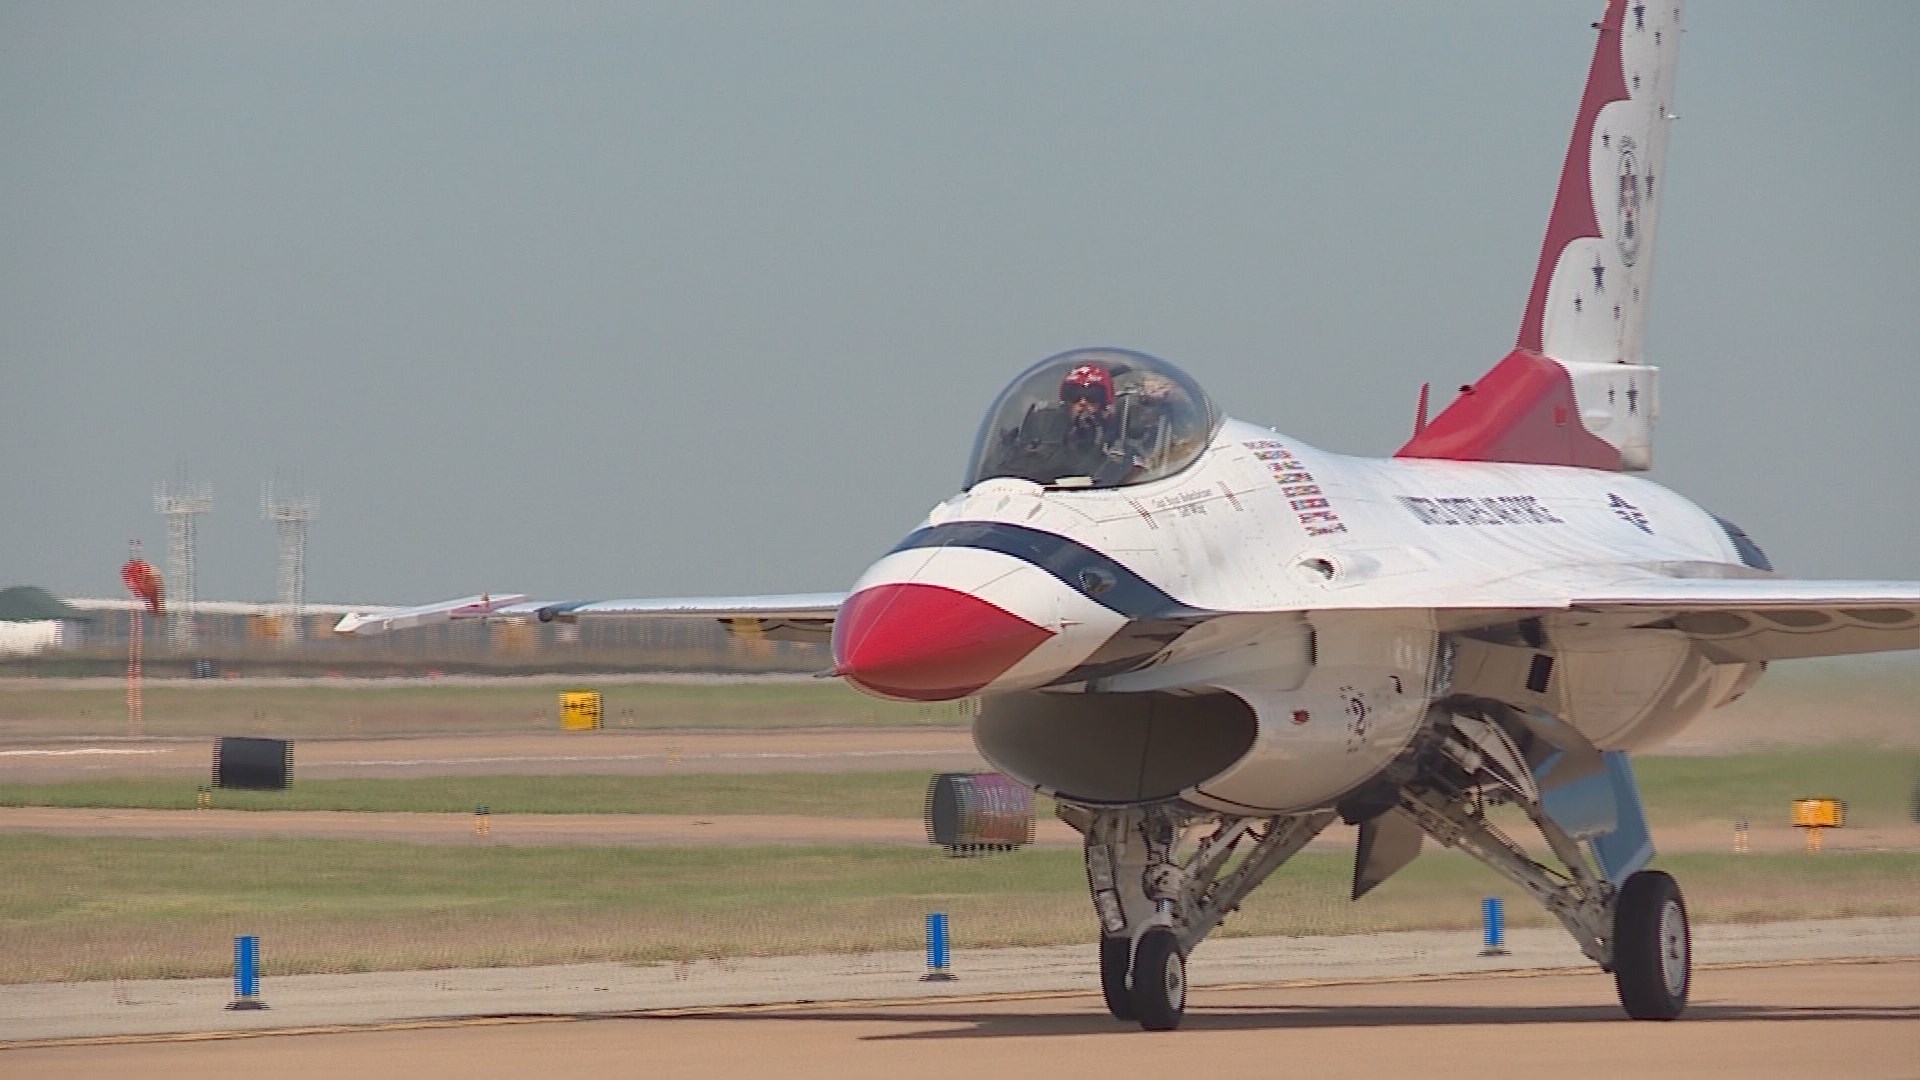 Thunderbirds arrive in Fort Worth for air show